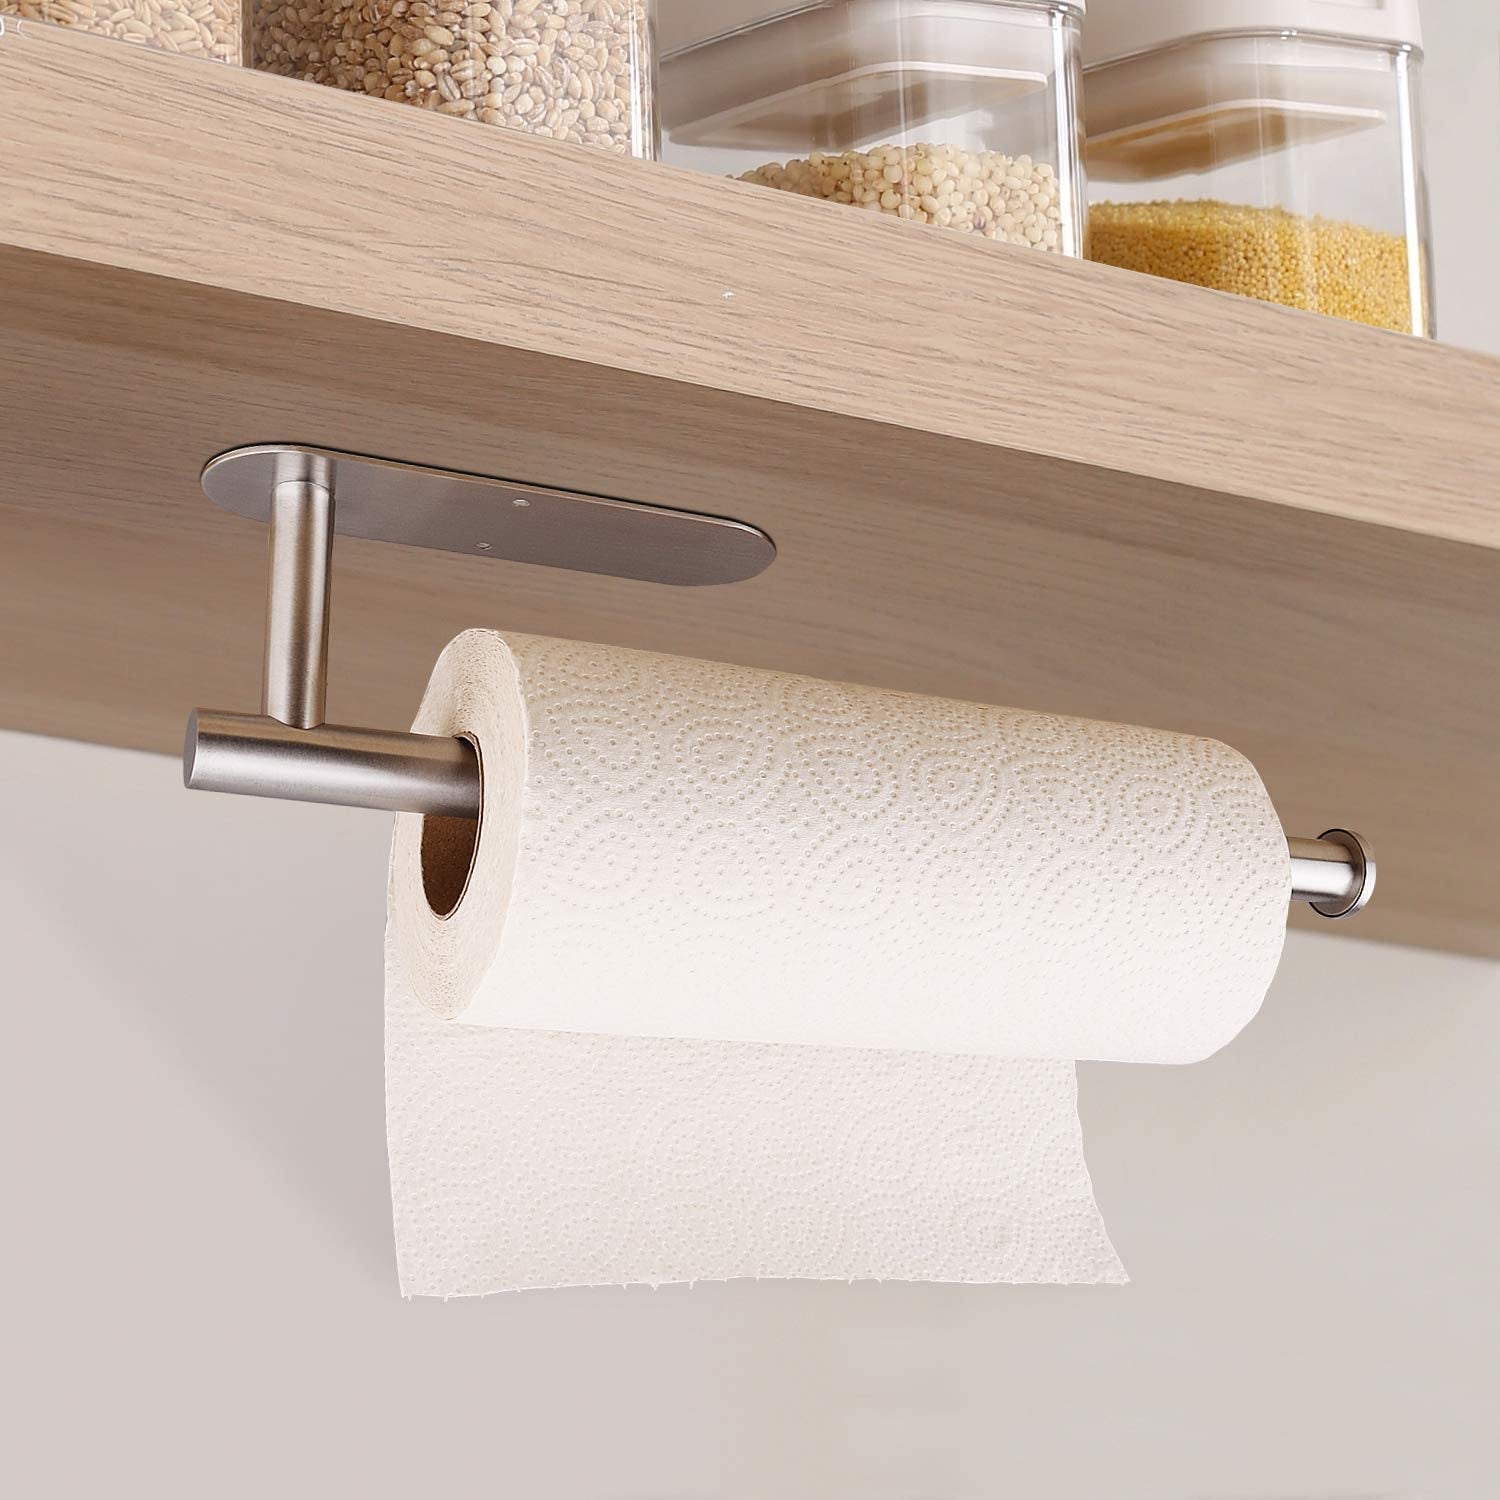 This Game-Changing $13 Paper Towel Holder Takes Up No Space and